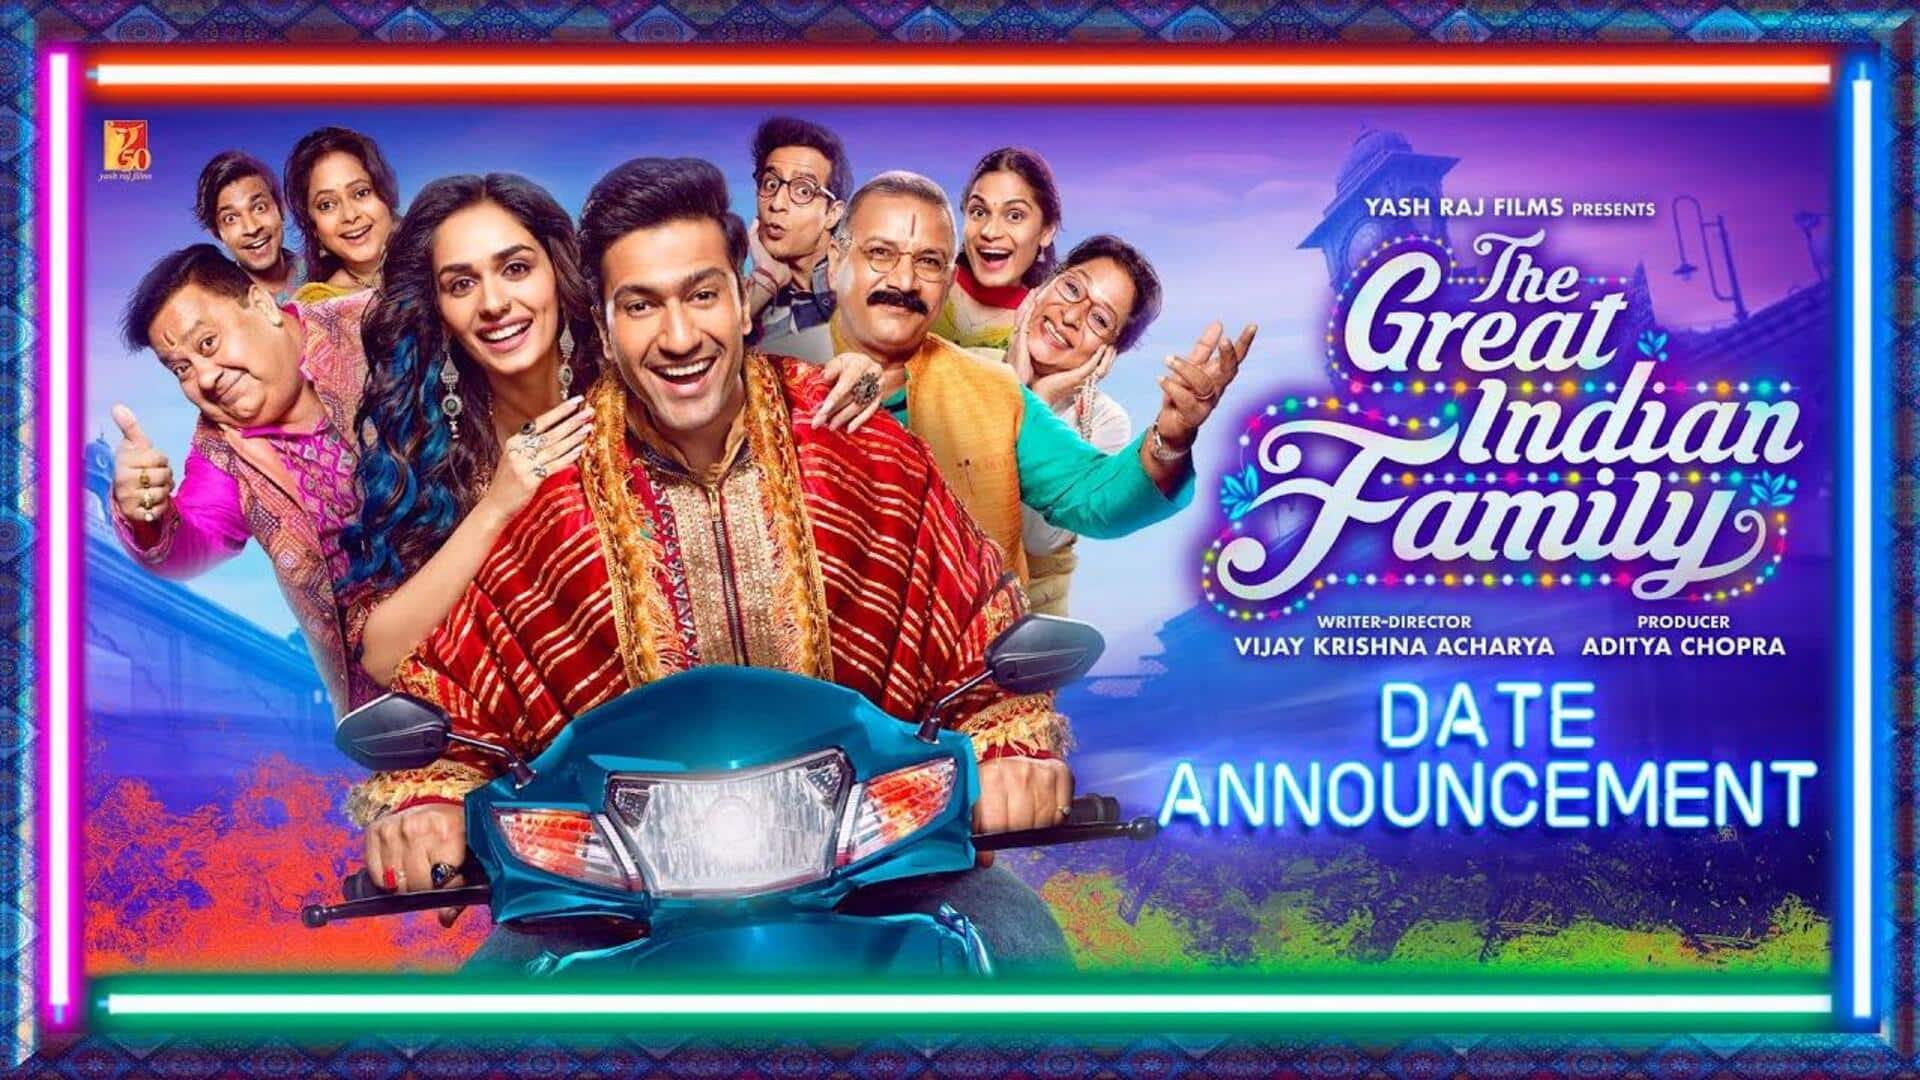 Box office collection: 'The Great Indian Family' in tough situation